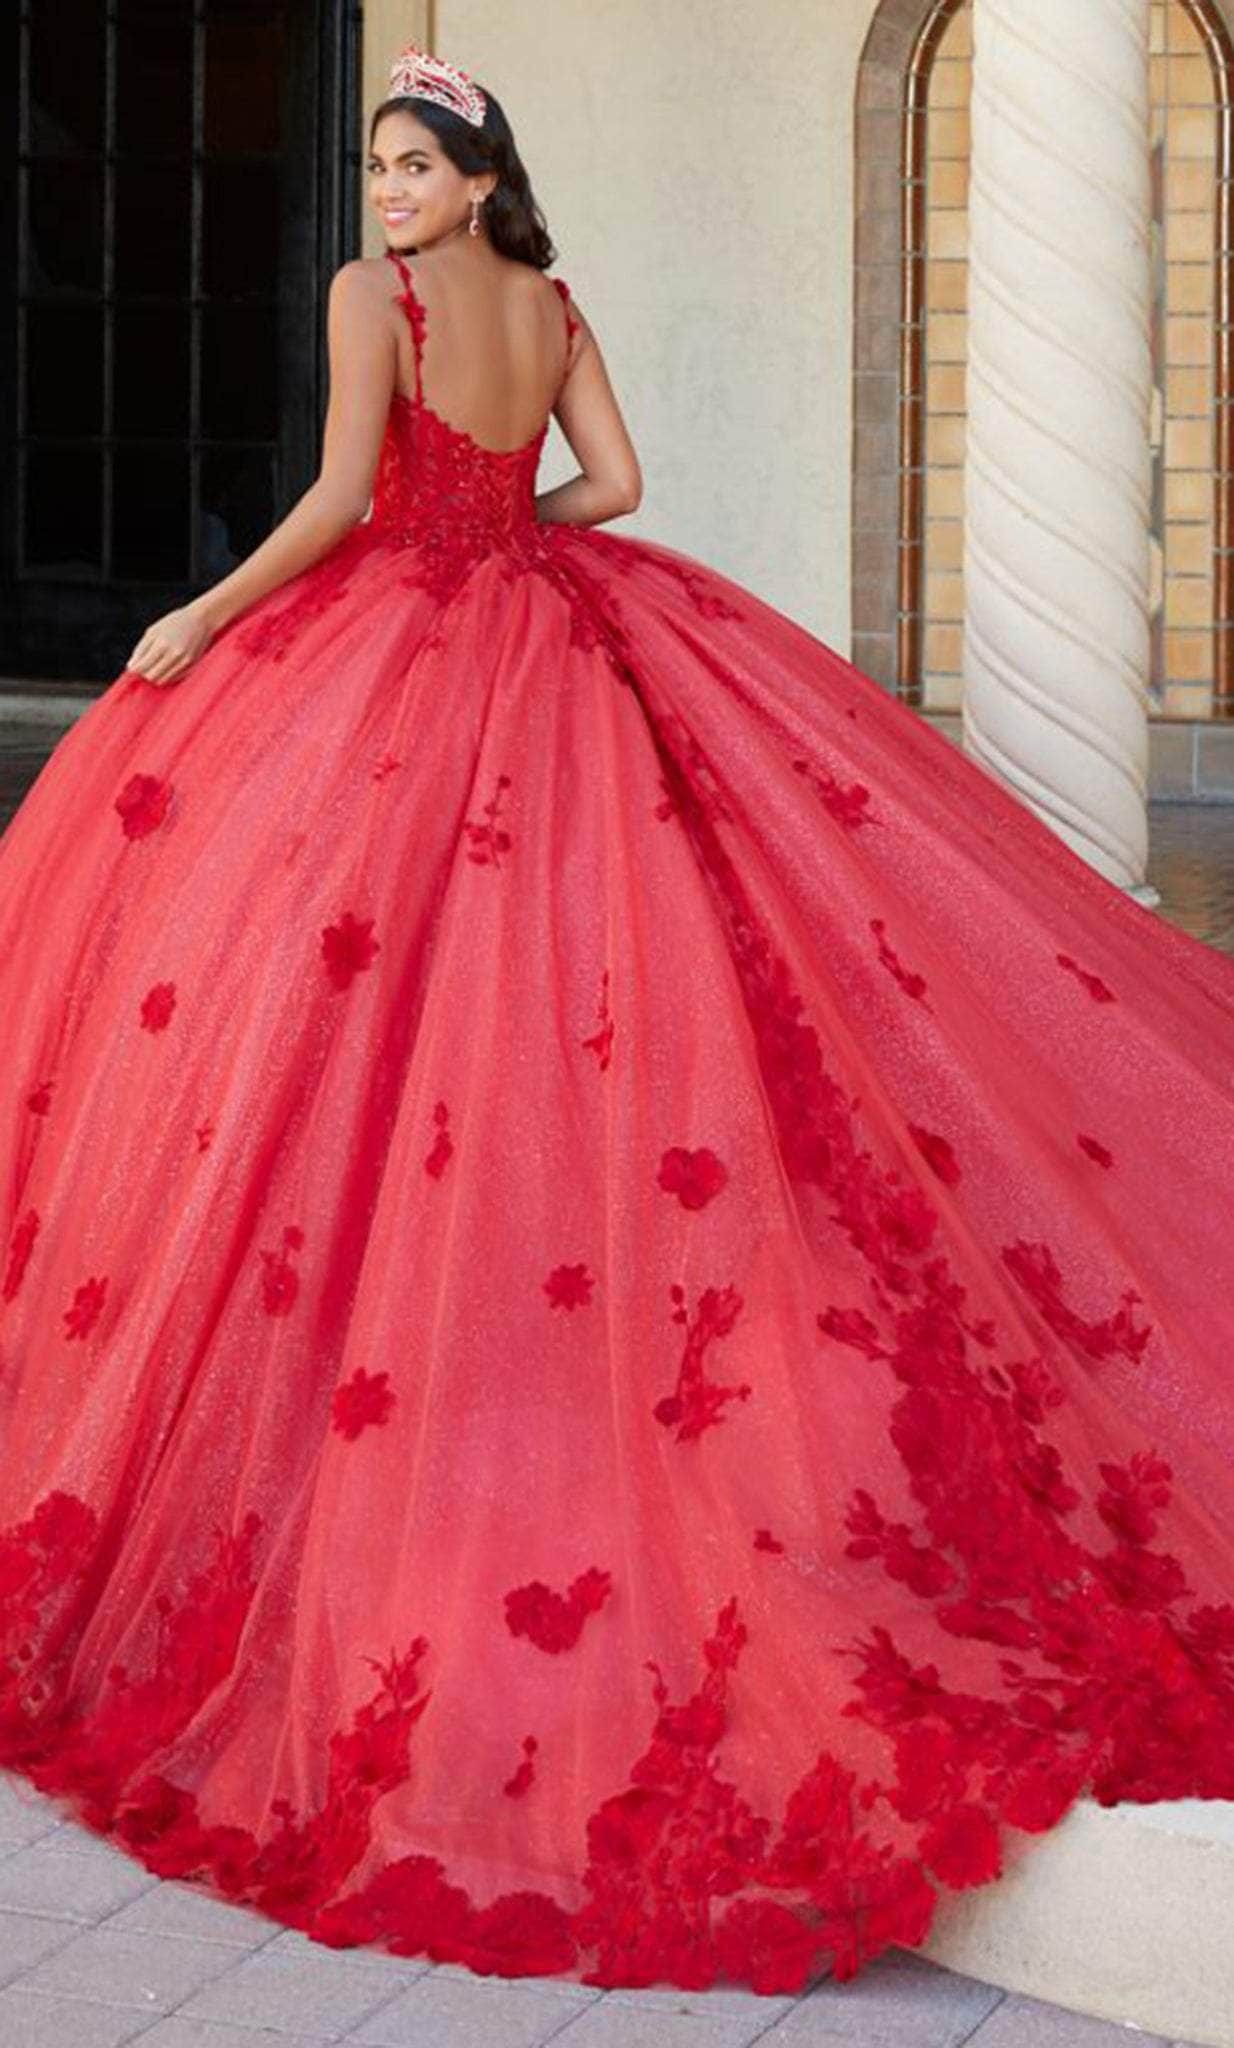 Quinceanera Collection 26064 - Lace Appliqué Sleeveless Ballgown Quinceanera Dresses